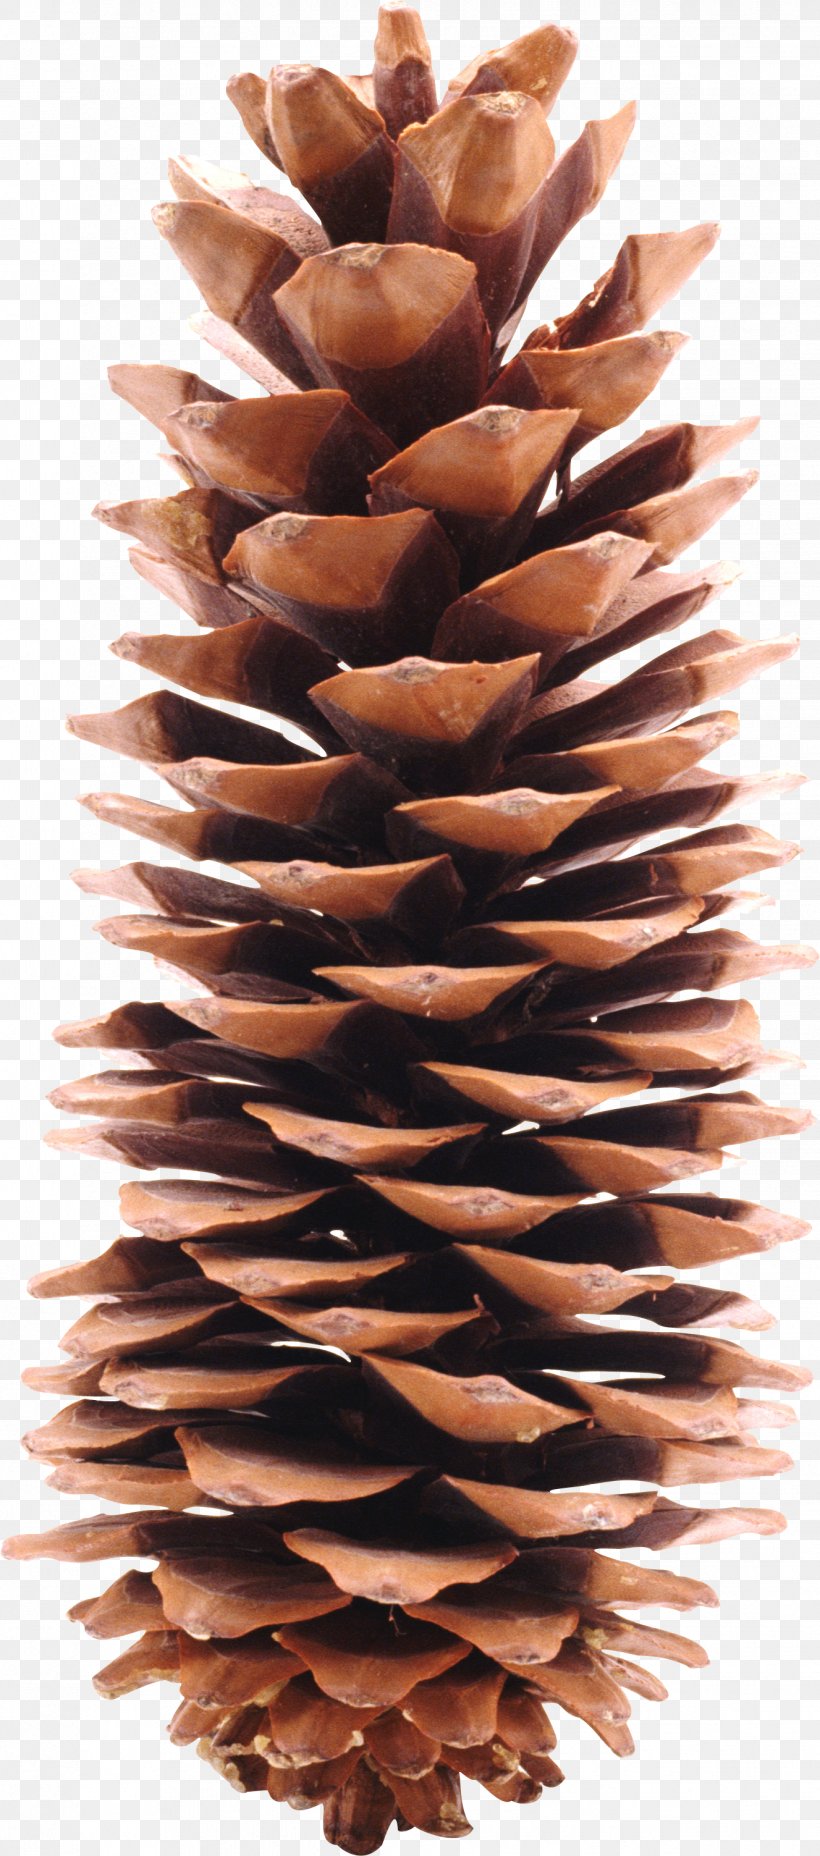 Grand Theft Auto V Conifer Cone Coub Website YouTube, PNG, 1327x3004px, Pine, Conifer Cone, Conifers, Digital Image, Knobcone Pine Download Free